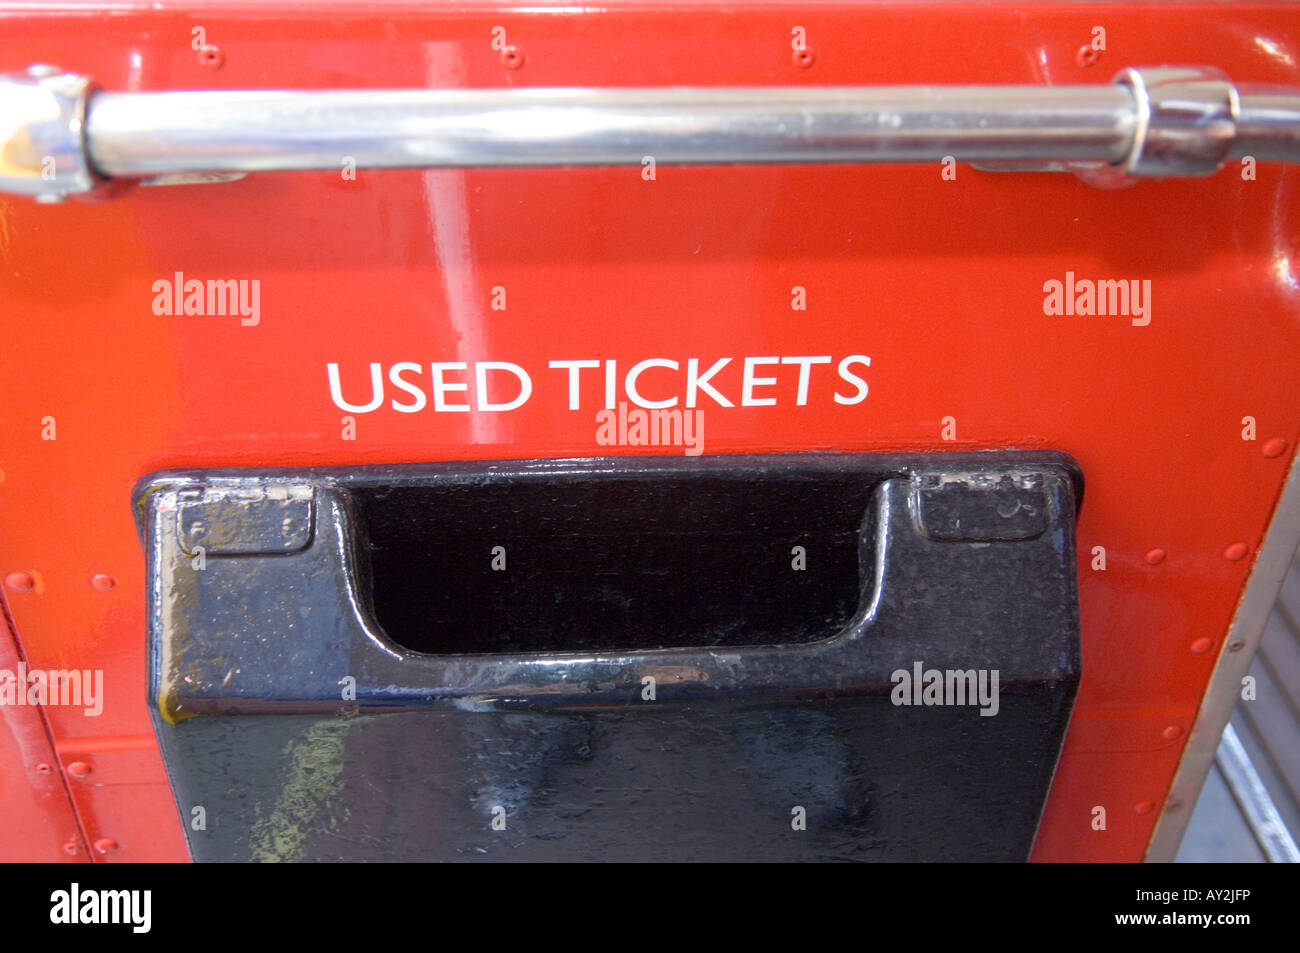 Used ticket box on old style London bus Stock Photo